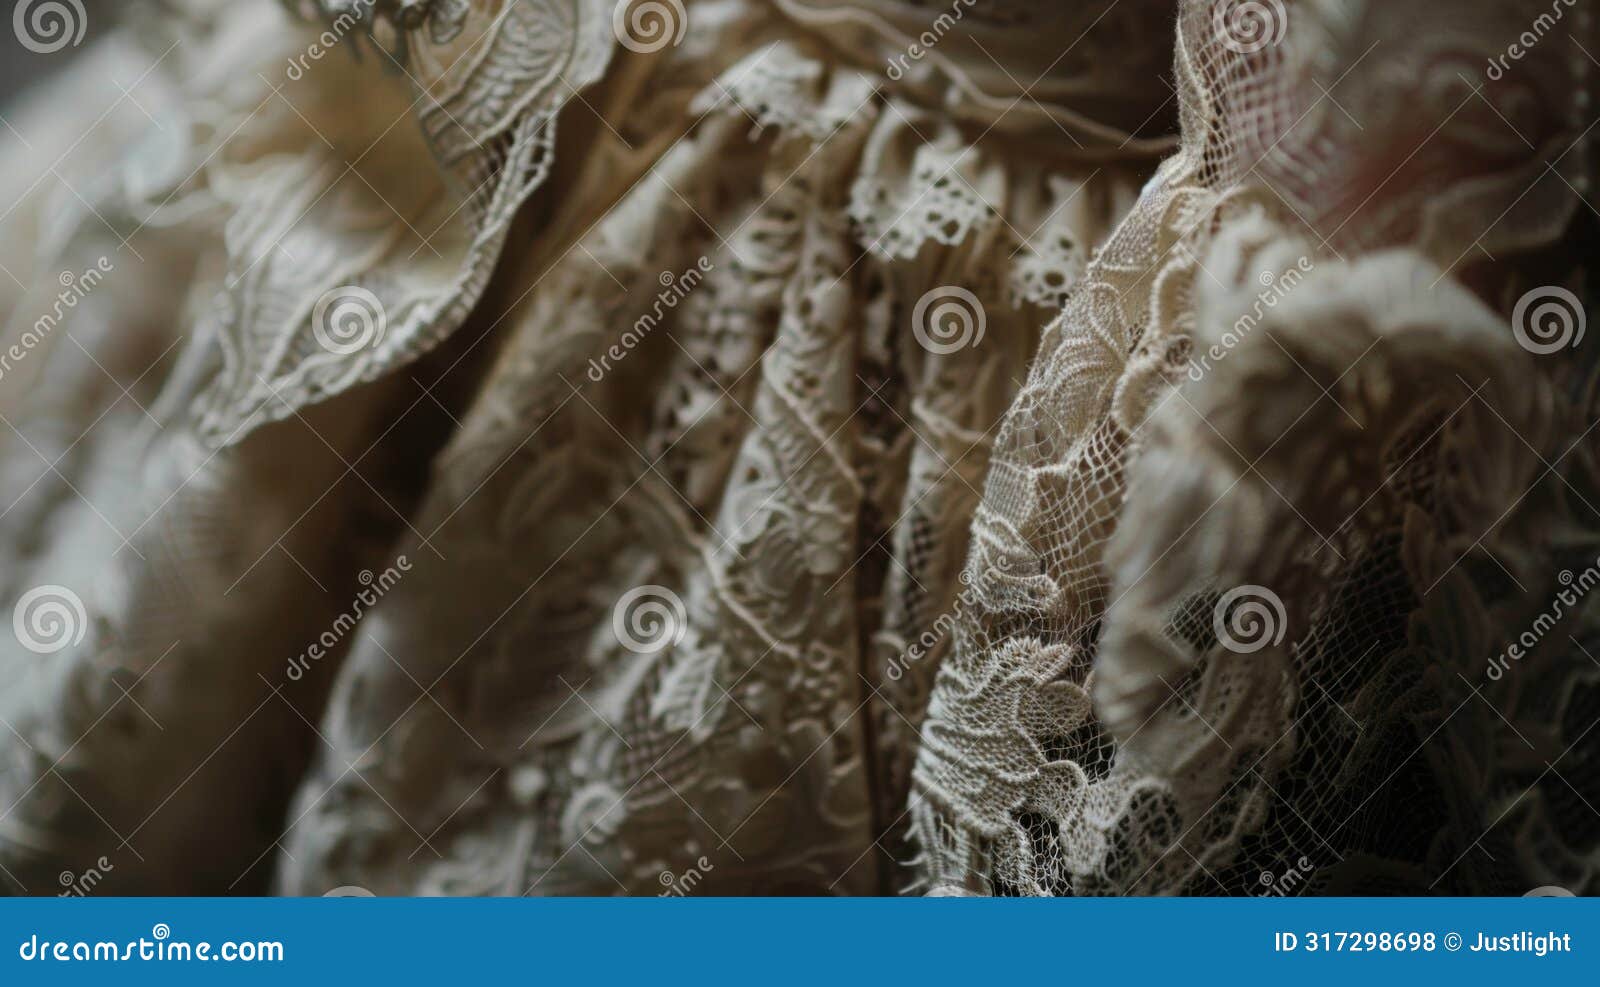 intricate lace details adorn a womans dress as she basks in the beauty of the performance